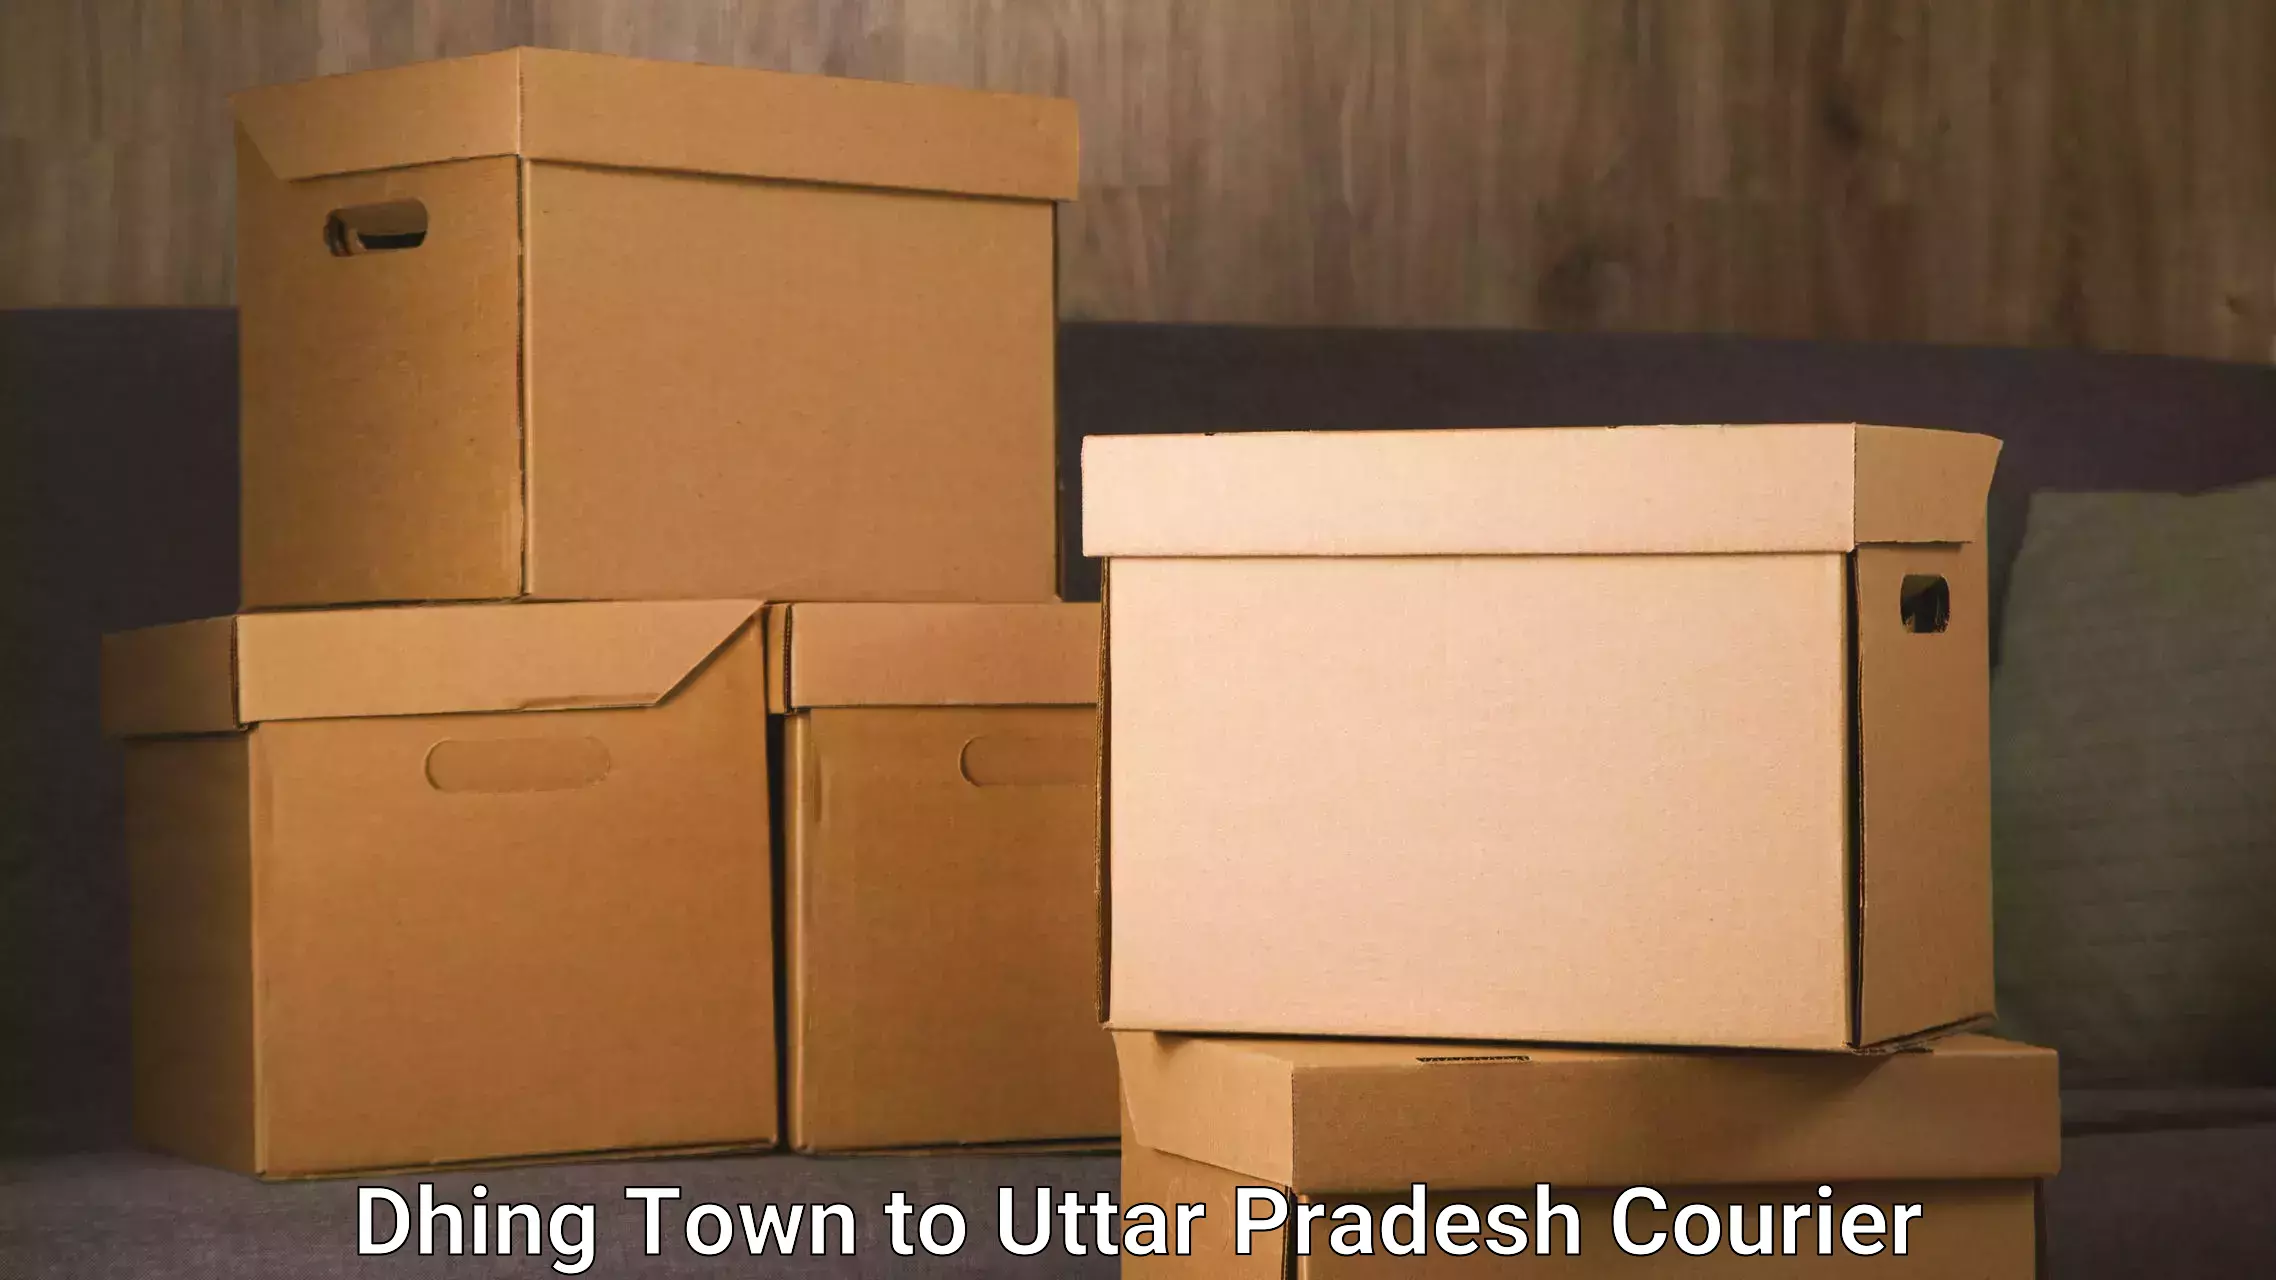 Cost-effective courier options in Dhing Town to Khadda